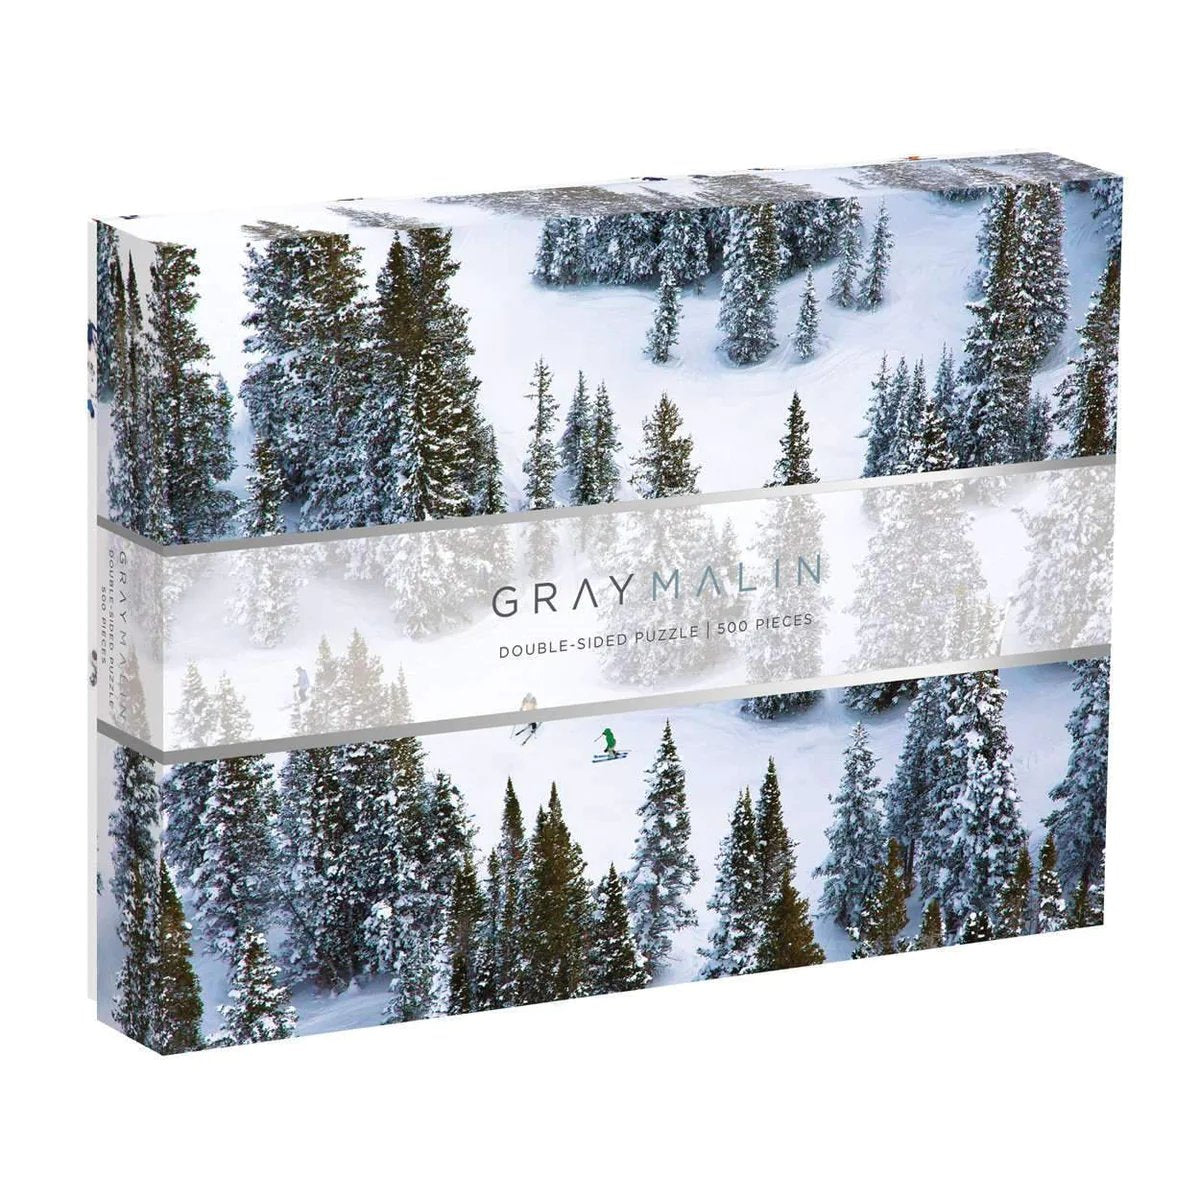 Gray Malin Snow Double-Sided Puzzle